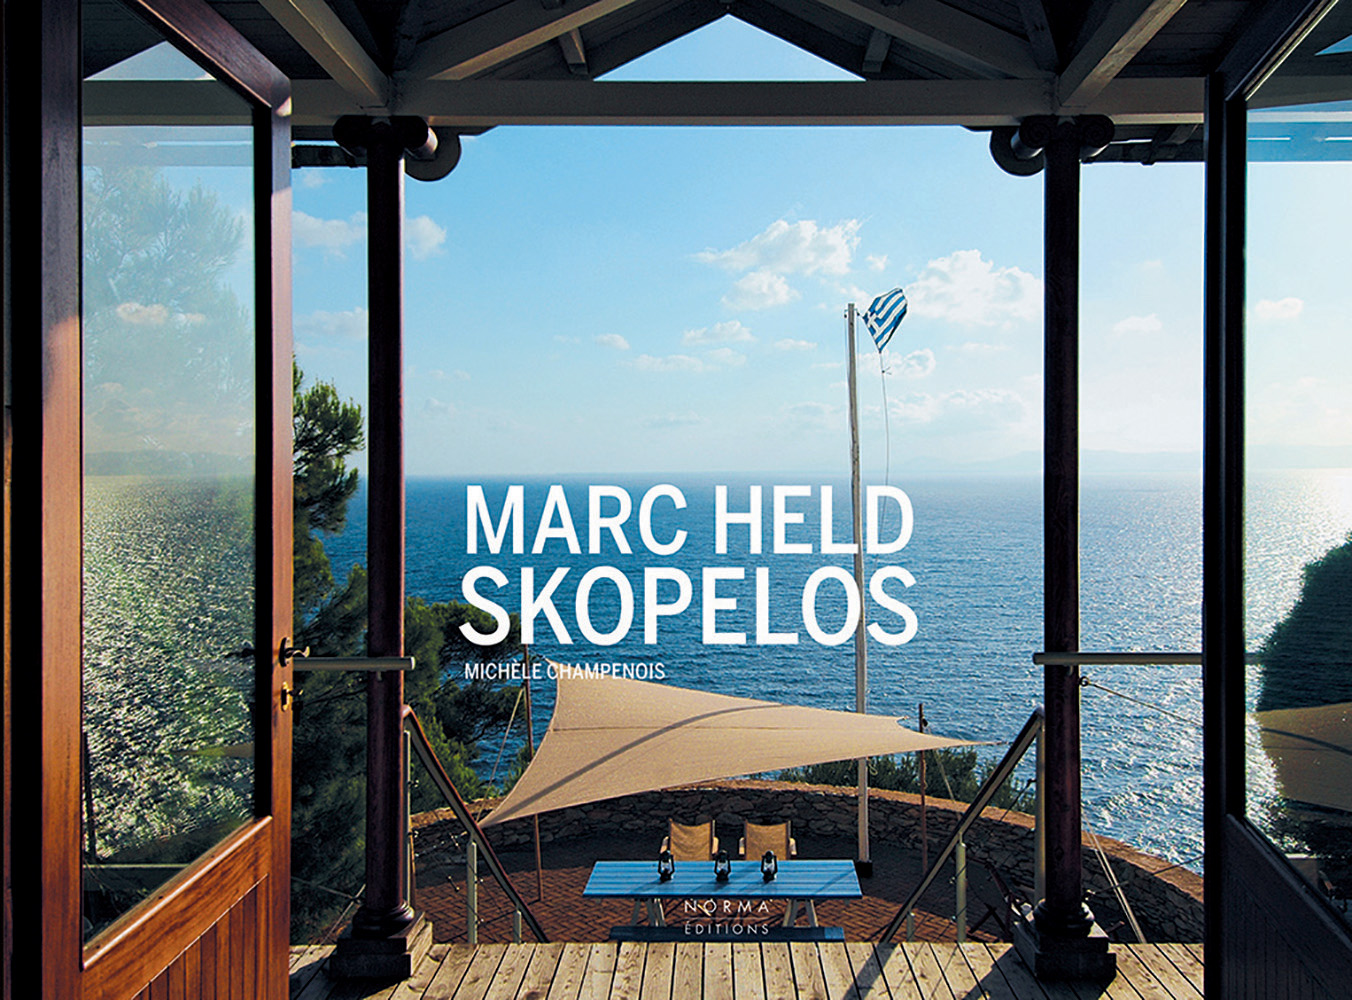 Residence with doors opening out to a sunny seascape, pole with flag of Greece flying, on landscape cover of 'Marc Held - Skopelos', by Editions Norma.